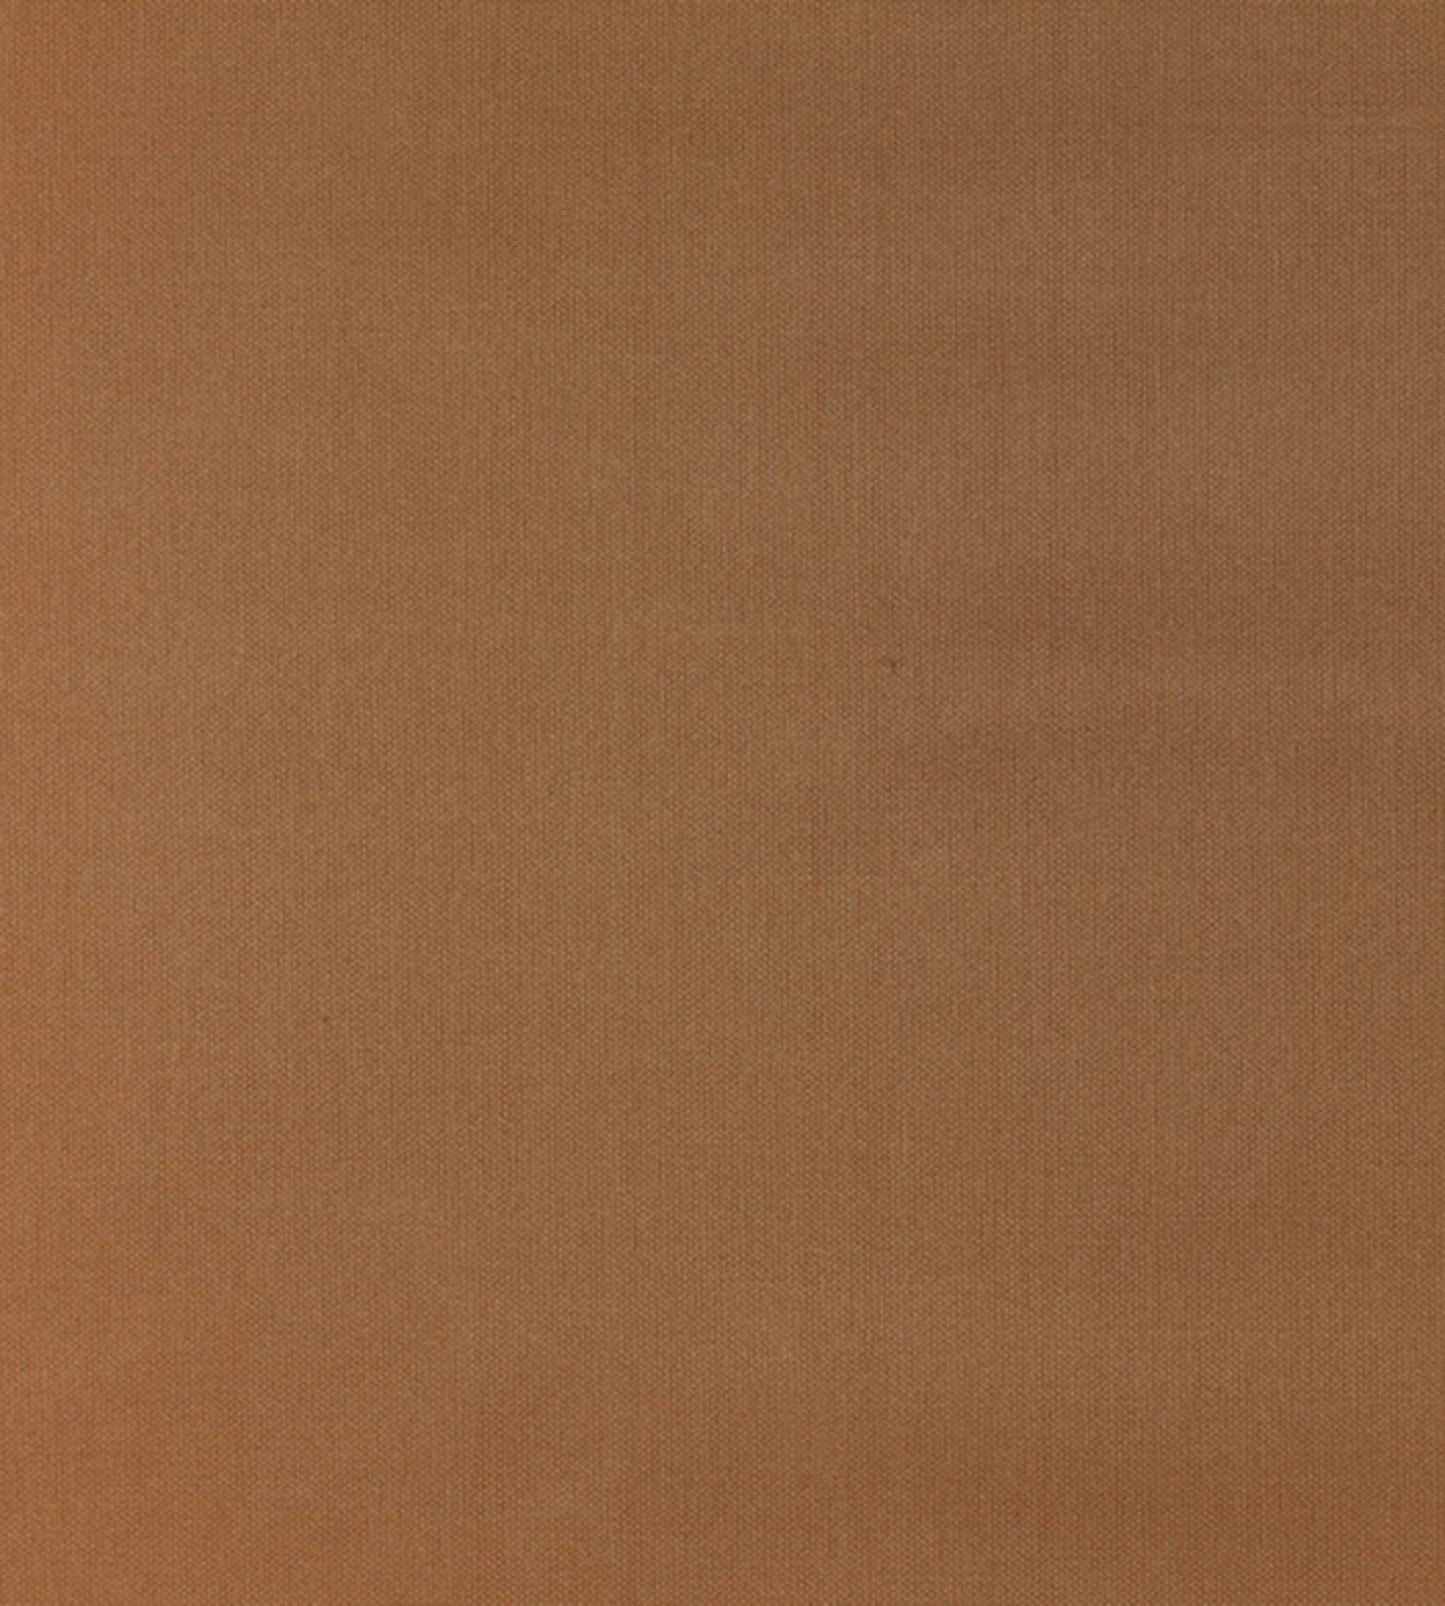 Purchase Old World Weavers Fabric Pattern VP 01051005, Pacific Silk Copper 1